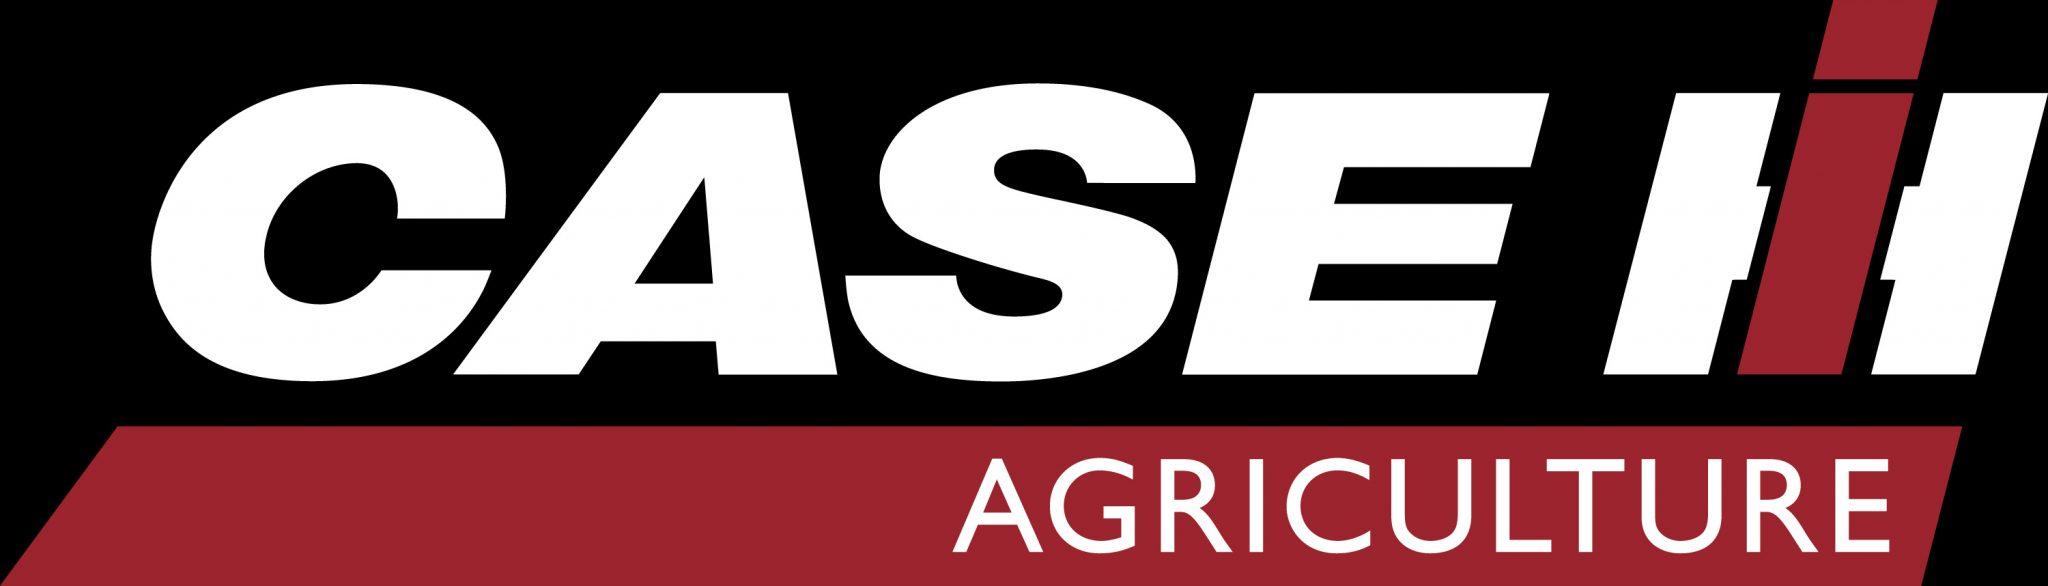 Case Logo - Agriculture | Hartwigs | CASE IH | Balers, Combines, Headers Fronts ...